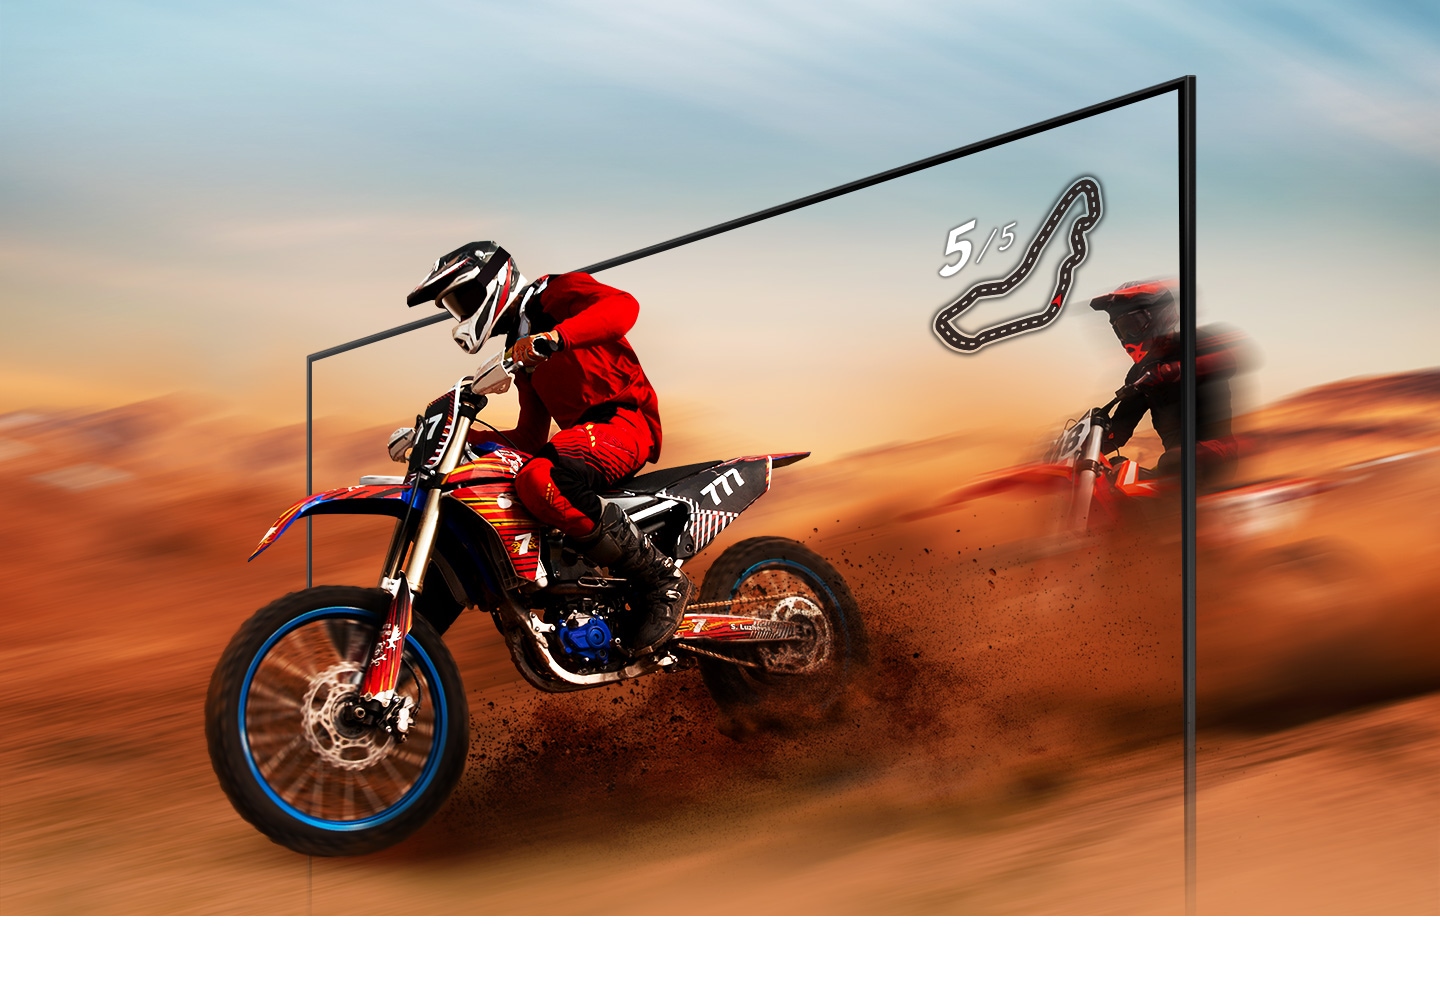 Samsung 43 inch Smart TV UA43AU7000; A dirt bike racer looks clear and visible inside the UHD TV screen because of UHD TV motion xcelerator technology.